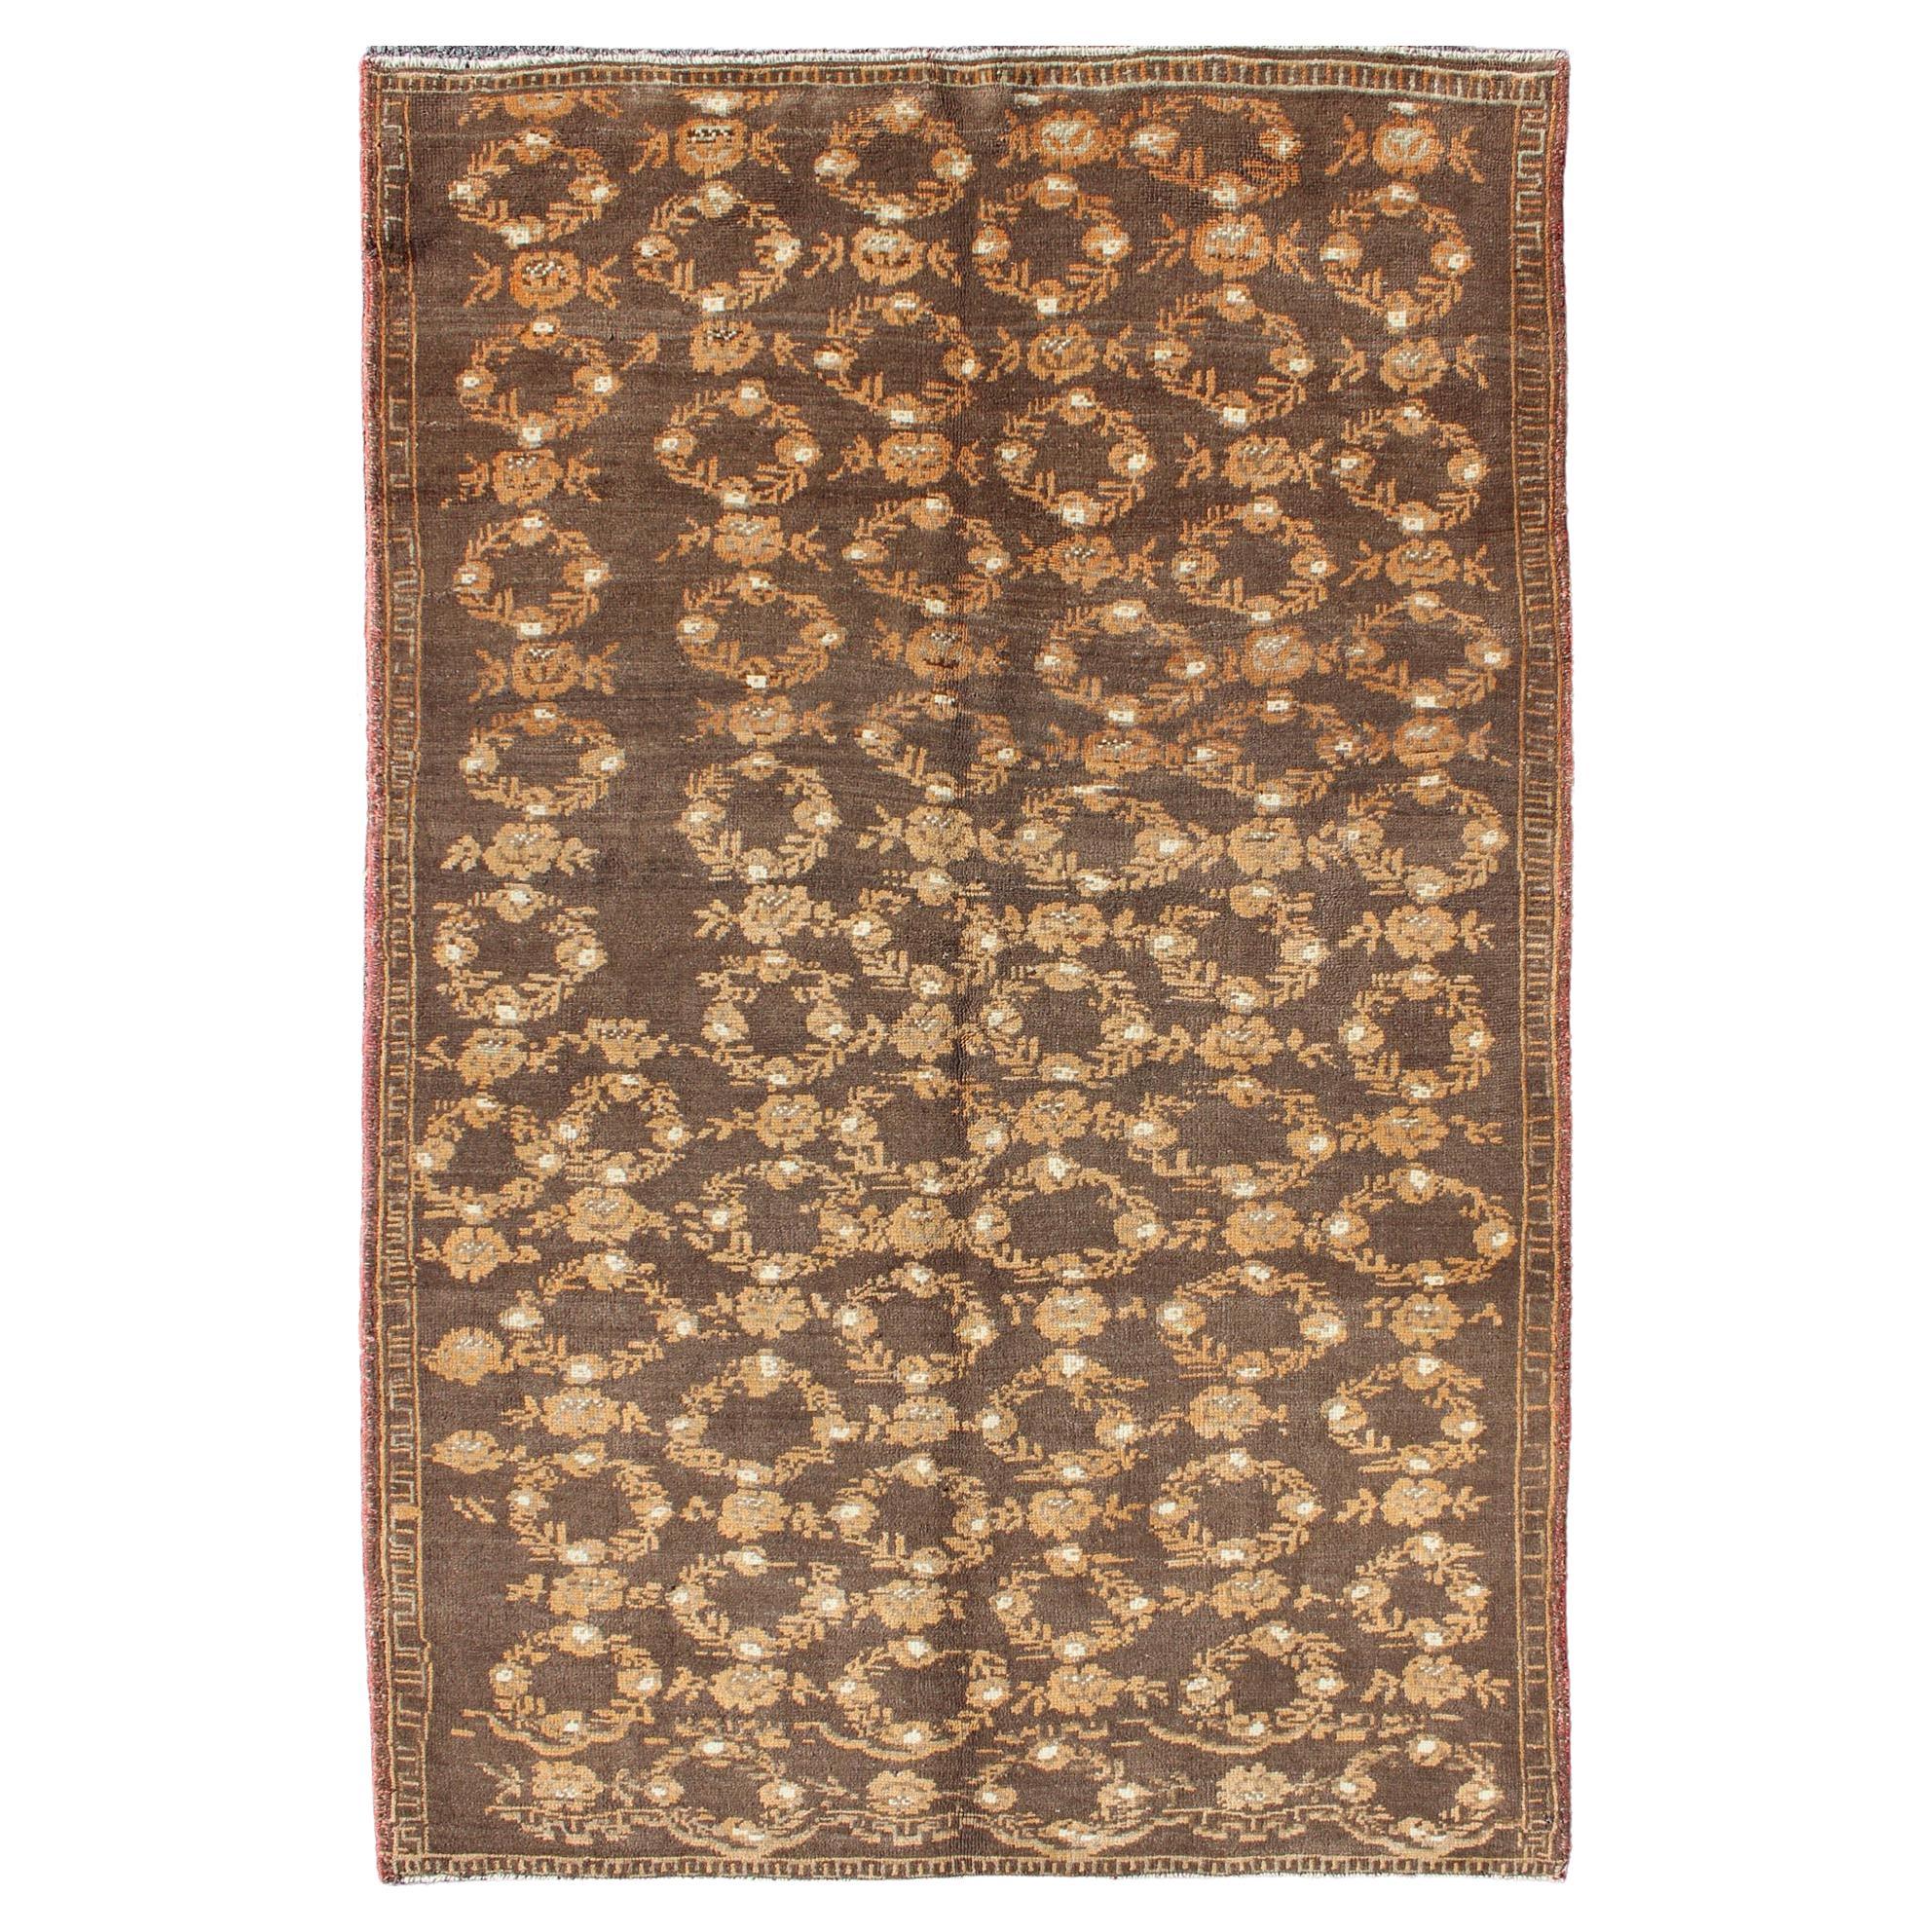 All-Over Floral Wreath Design Turkish Oushak Rug with Brown Background For Sale